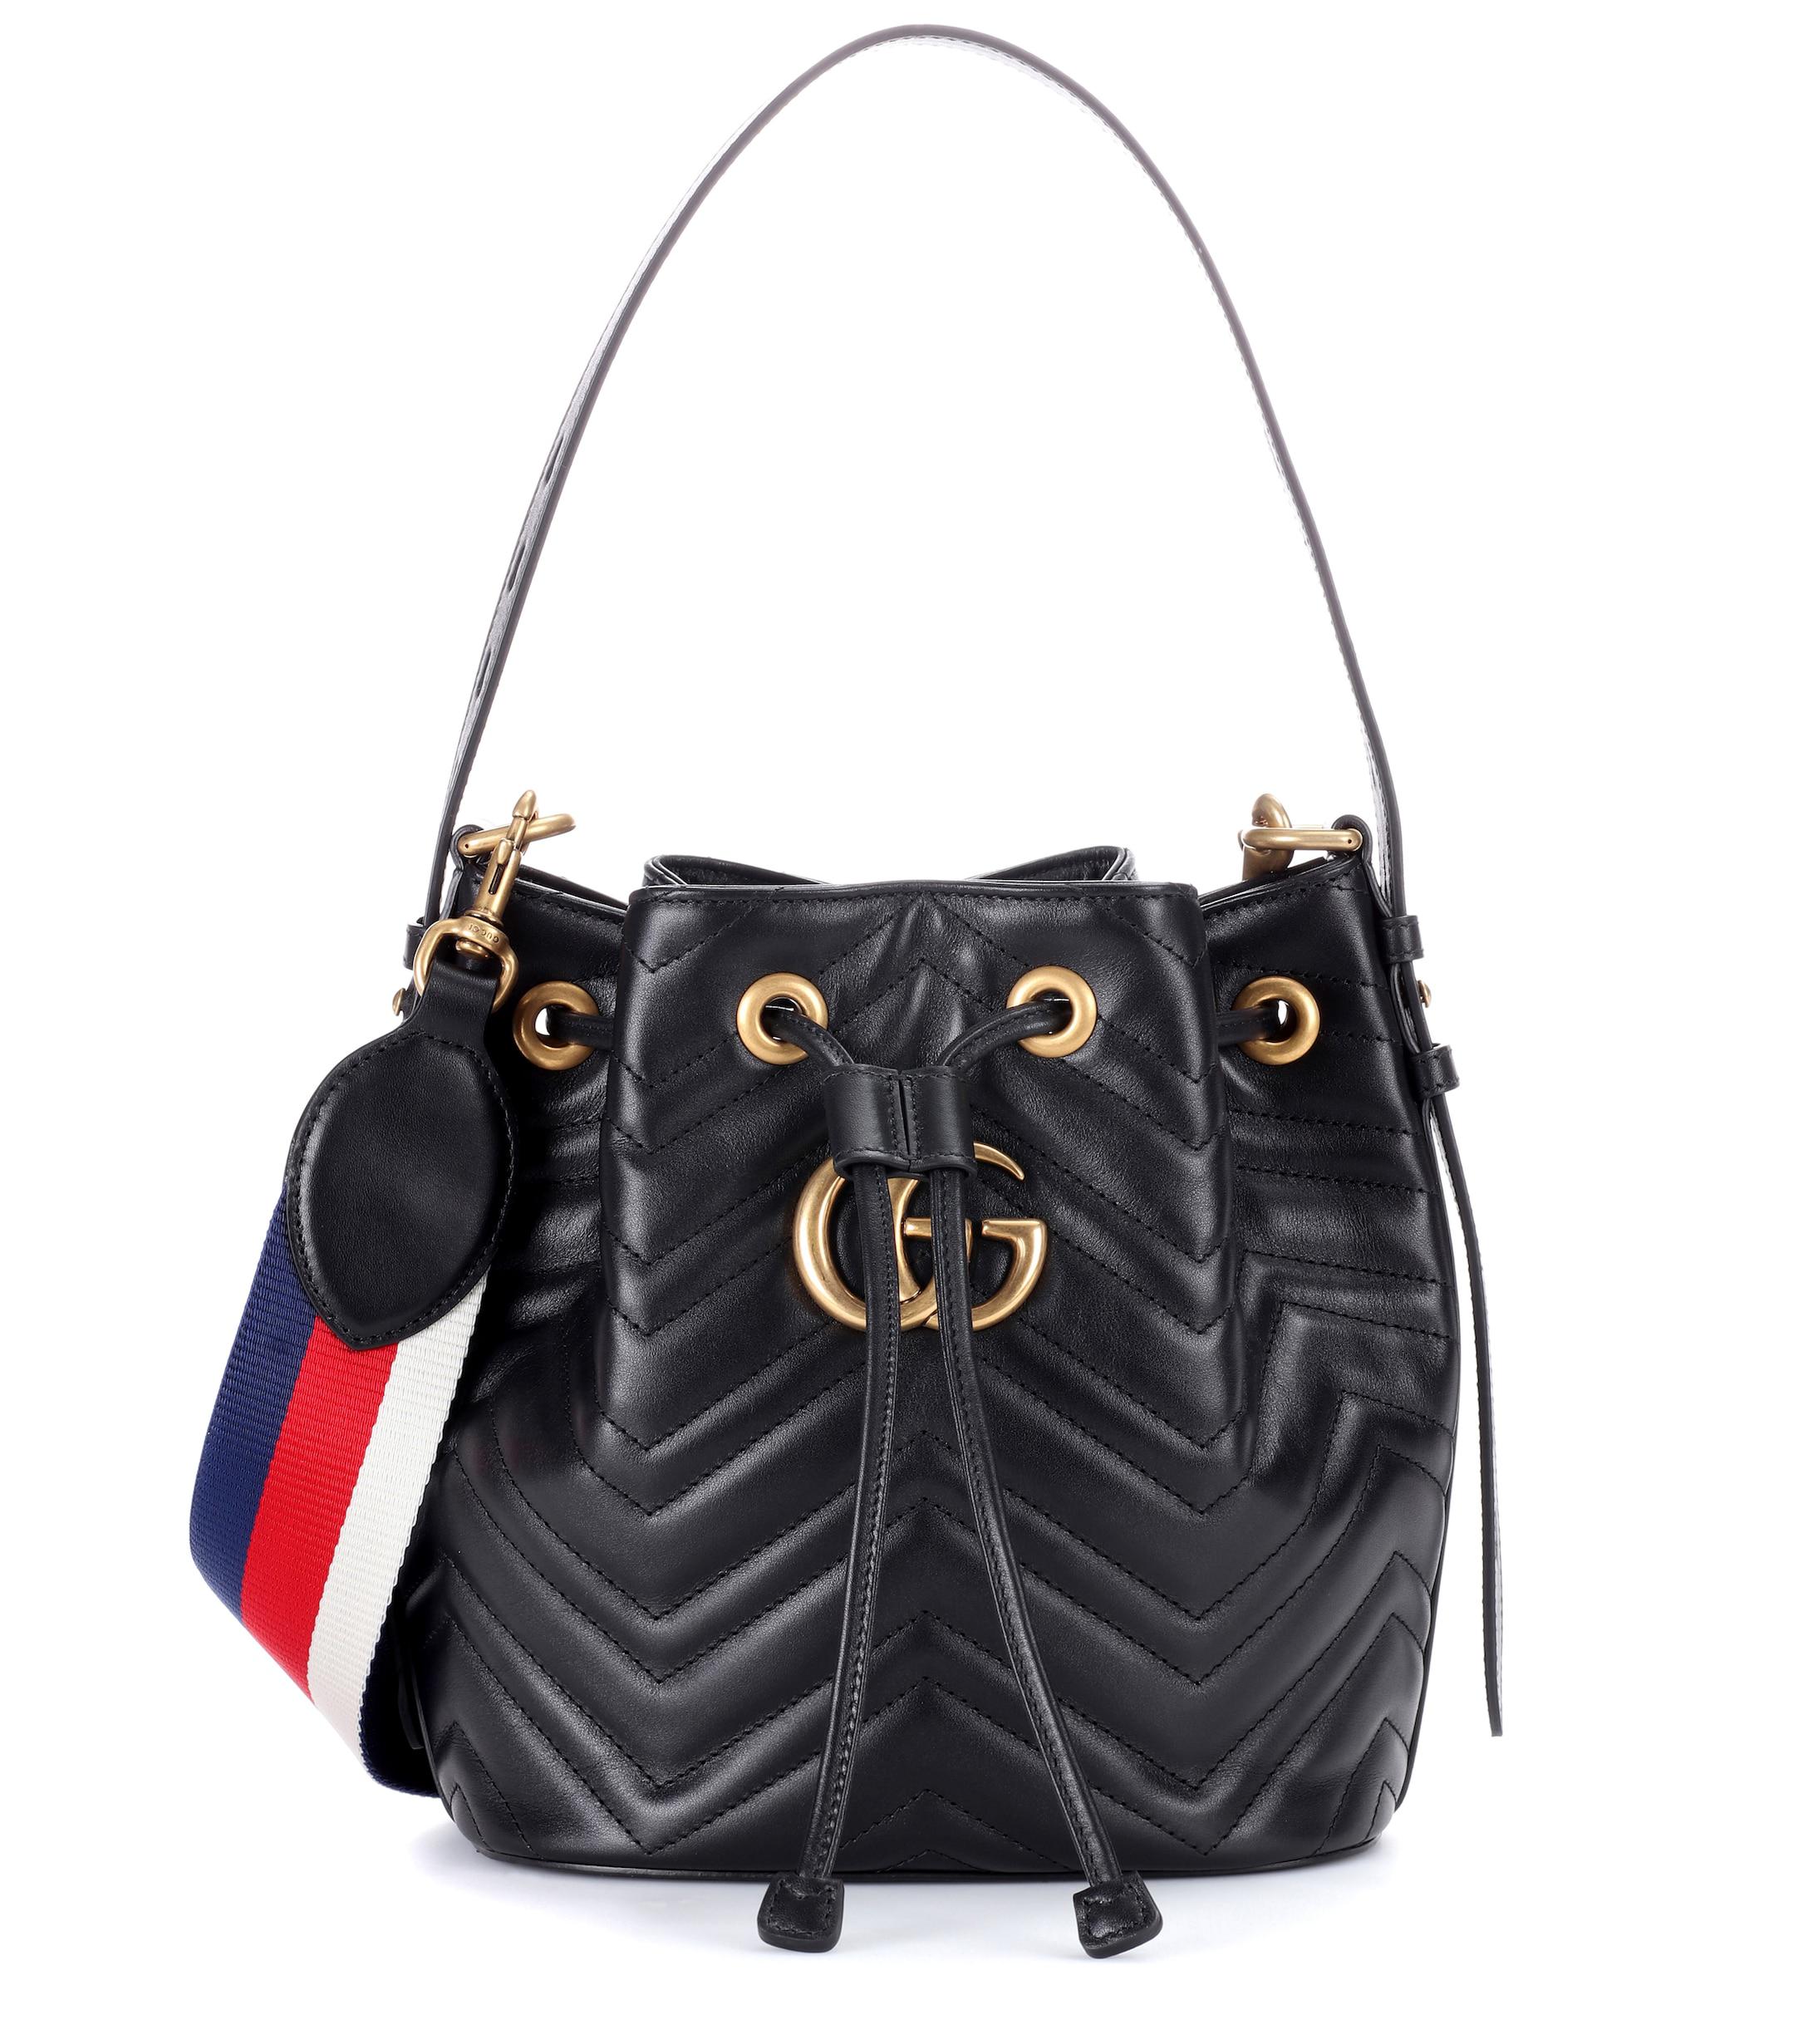 Gucci GG Marmont Leather Bucket Bag in Nero (Black) - Lyst